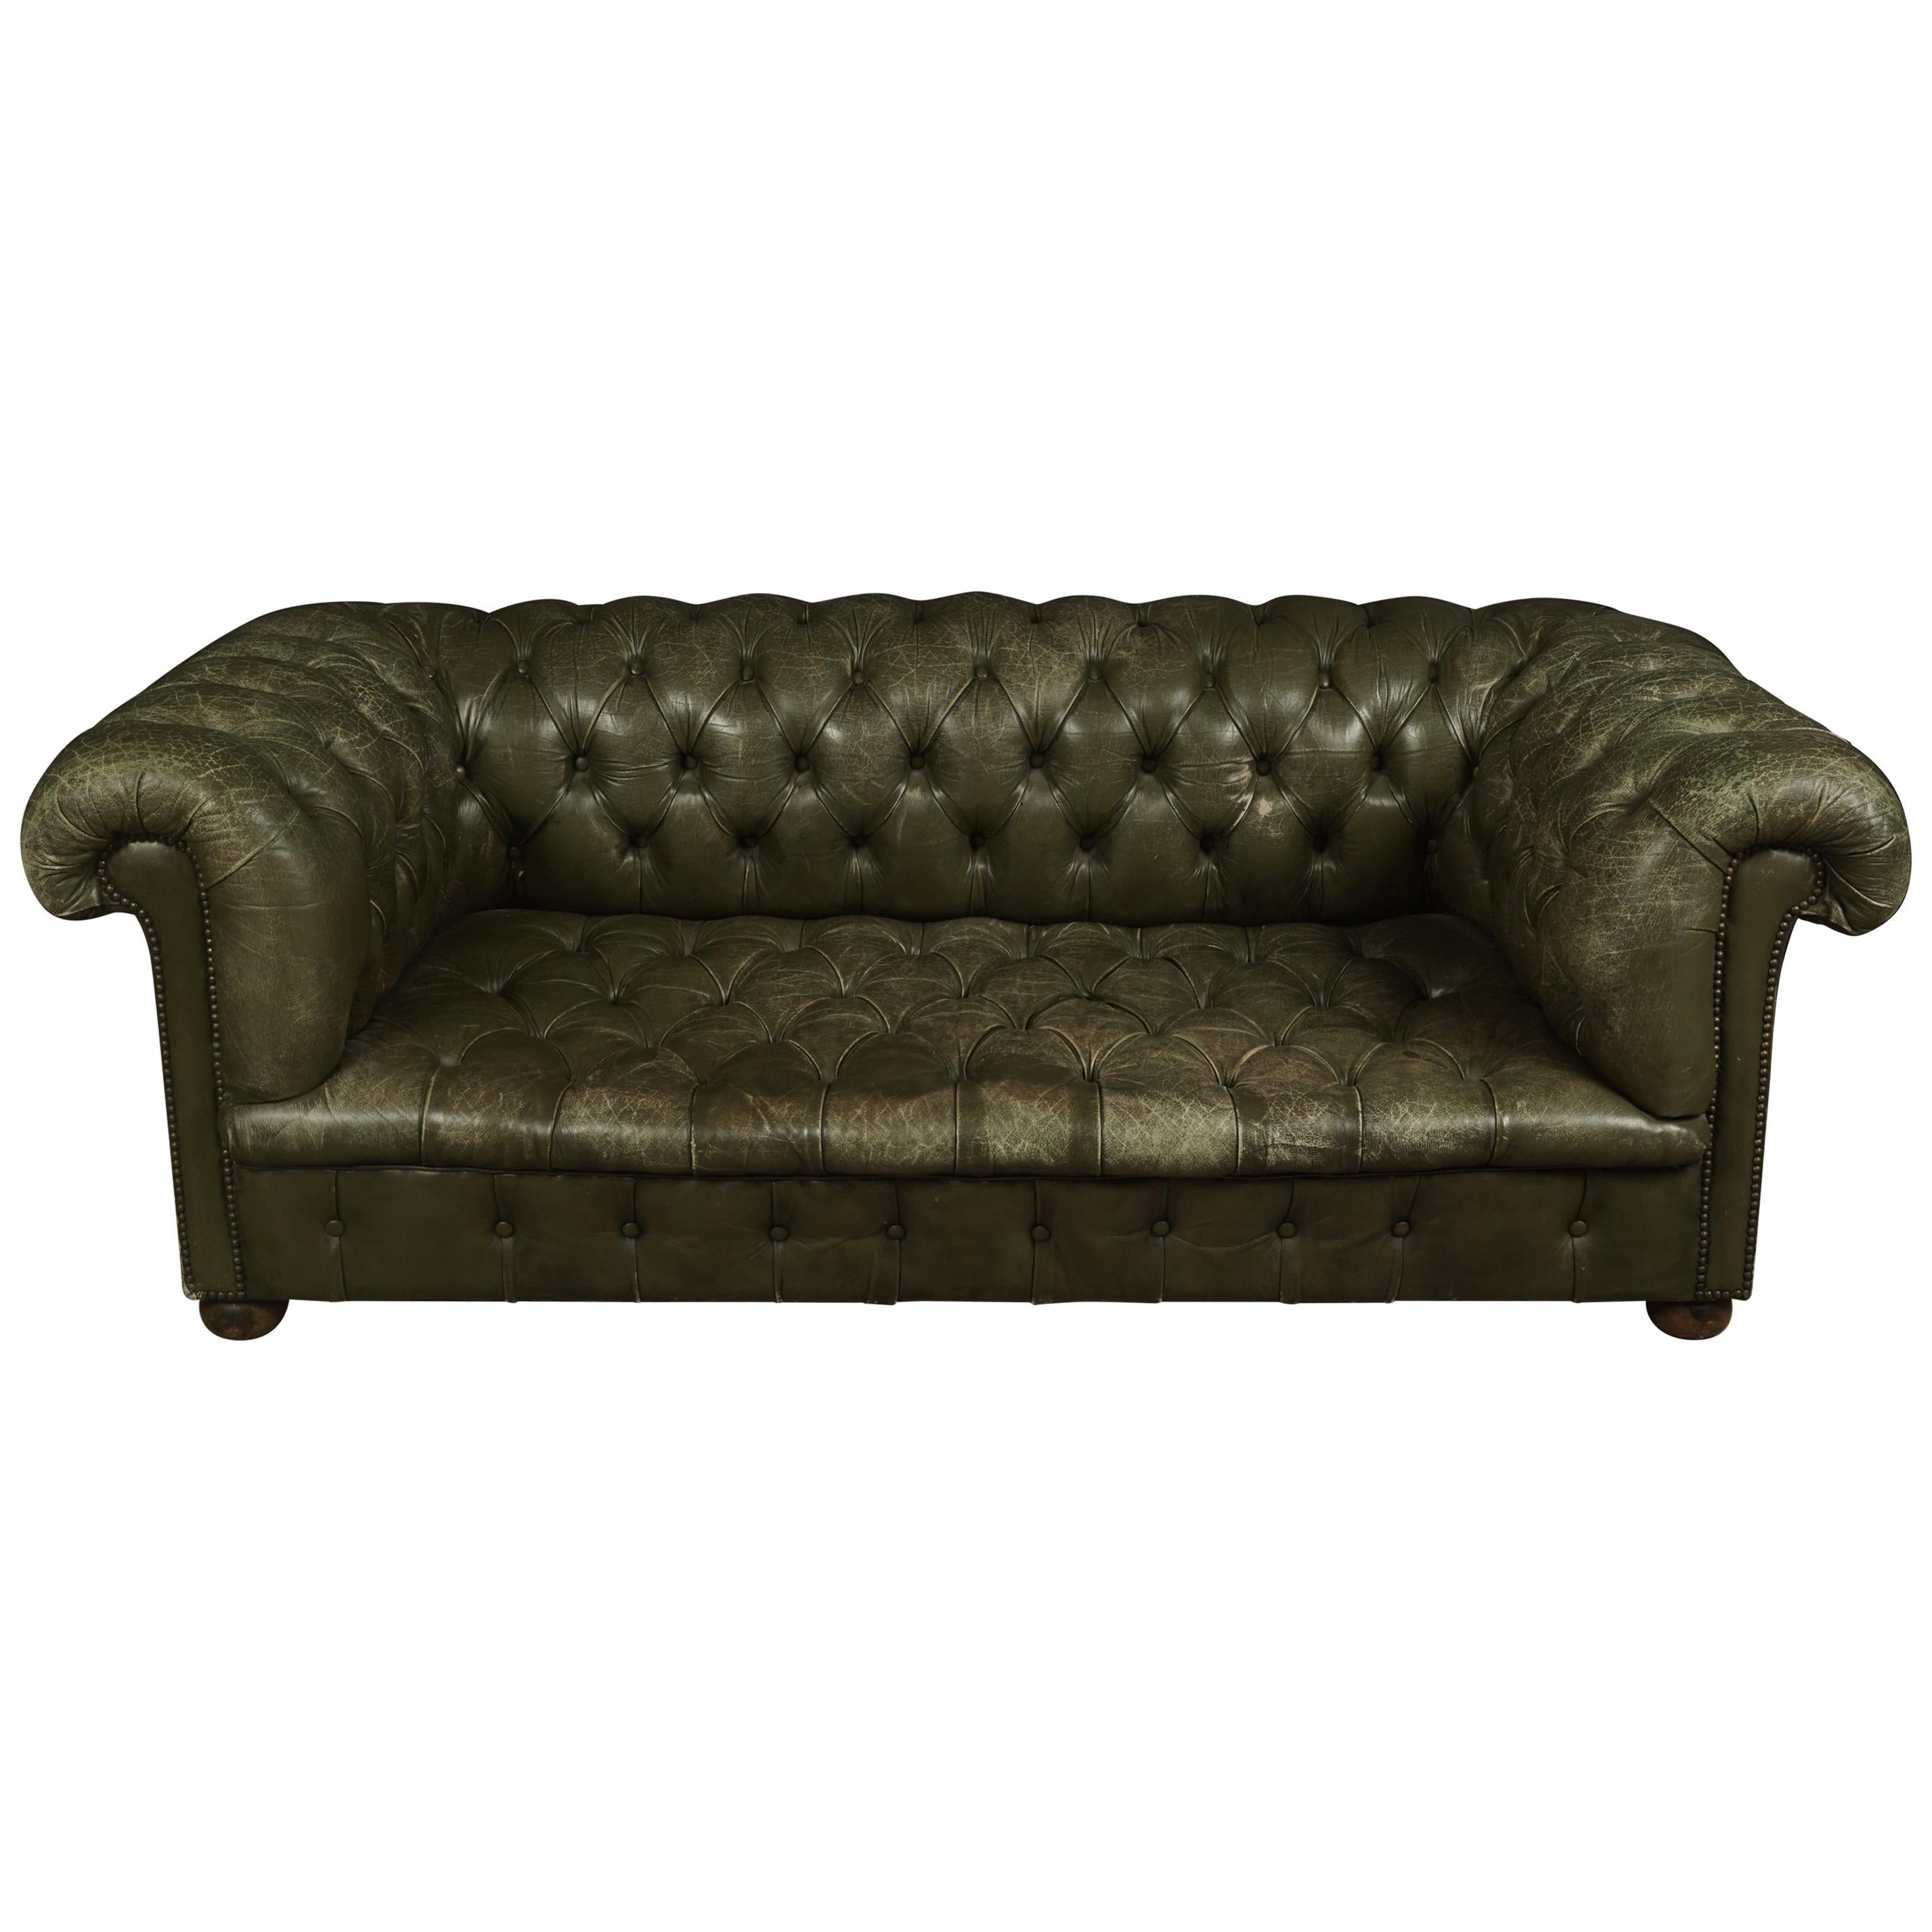 Vintage Leather Chesterfield Sofa from England, circa 1960